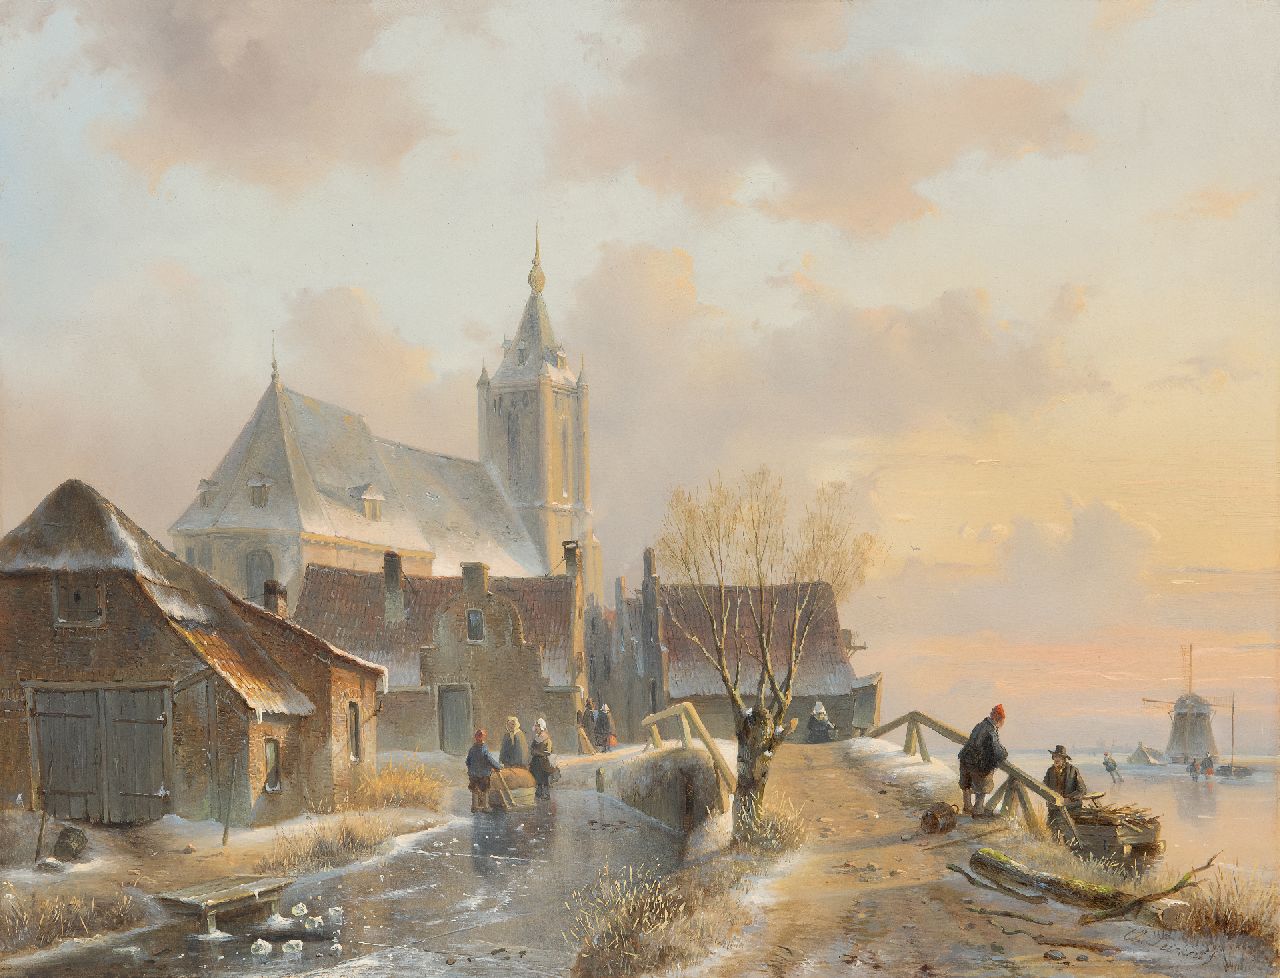 Leickert C.H.J.  | 'Charles' Henri Joseph Leickert, A snowy village view with skaters, oil on panel 37.5 x 49.7 cm, signed l.r. and painted ca. 1845